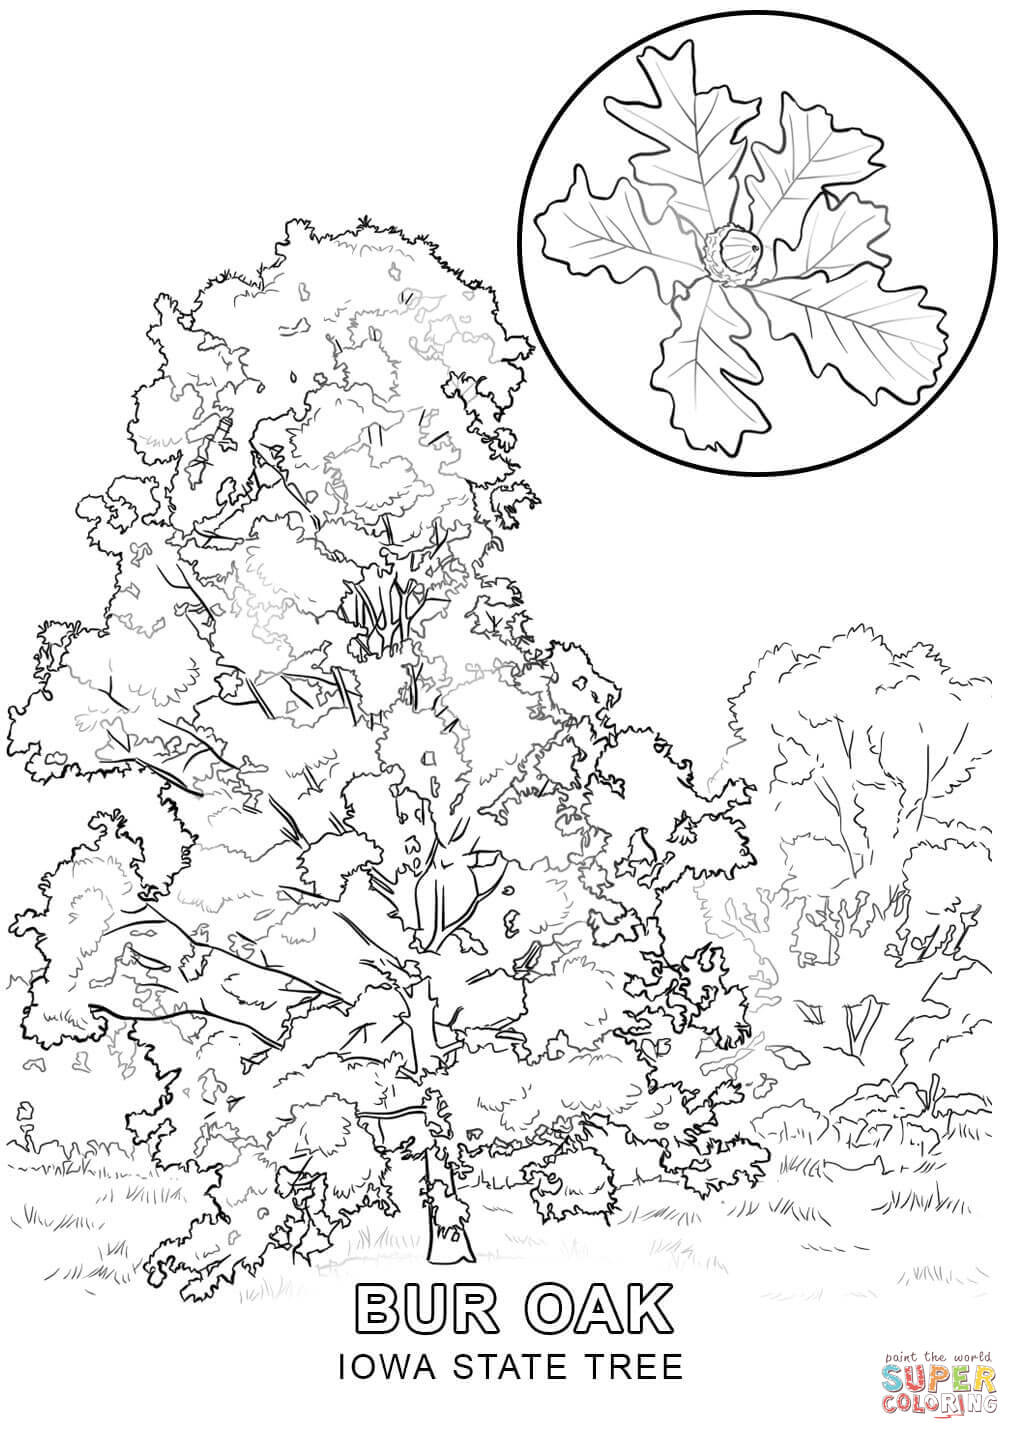 Iowa State Tree coloring page | Free Printable Coloring Pages